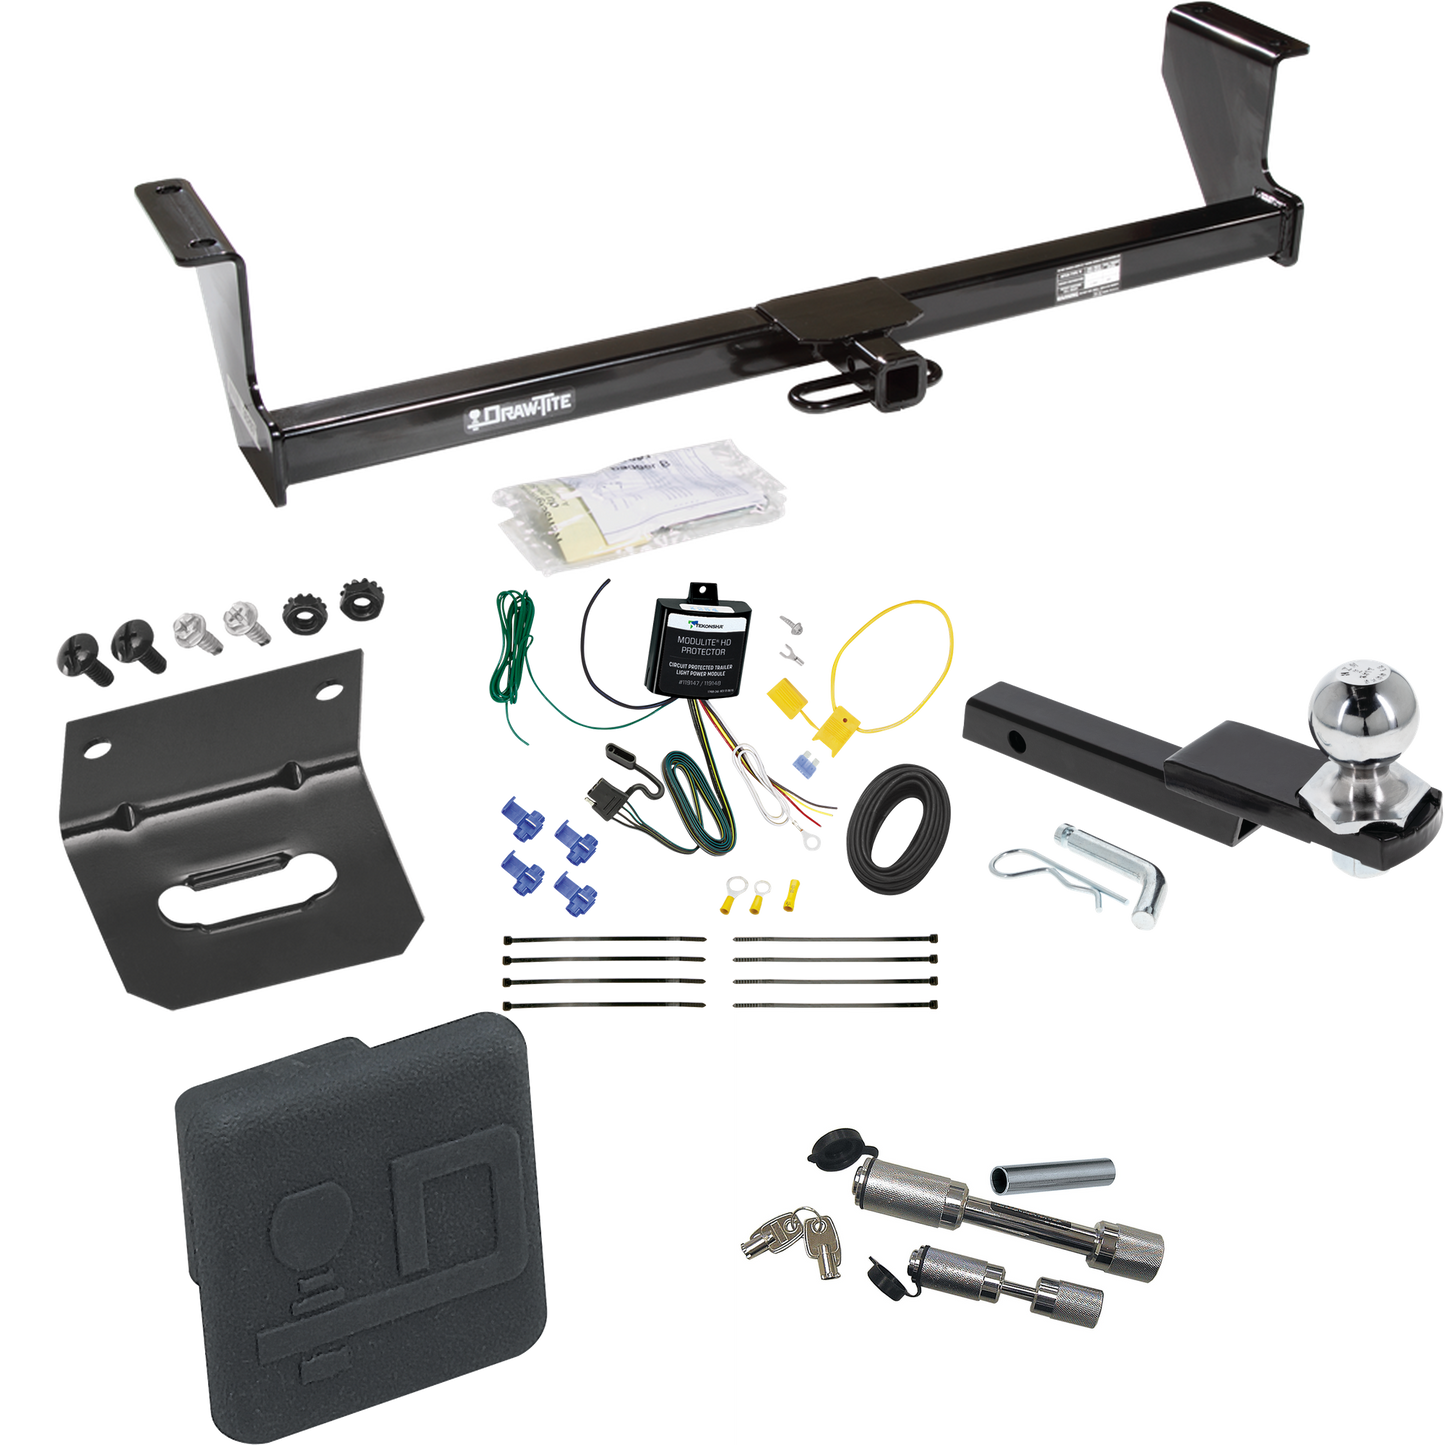 Fits 2001-2007 Volvo V70 Trailer Hitch Tow PKG w/ 4-Flat Wiring Harness + Interlock Starter Kit w/ 2" Ball 1-1/4" Drop 3/4" Rise + Wiring Bracket + Hitch Cover + Dual Hitch & Coupler Locks (For Wagon Models) By Draw-Tite